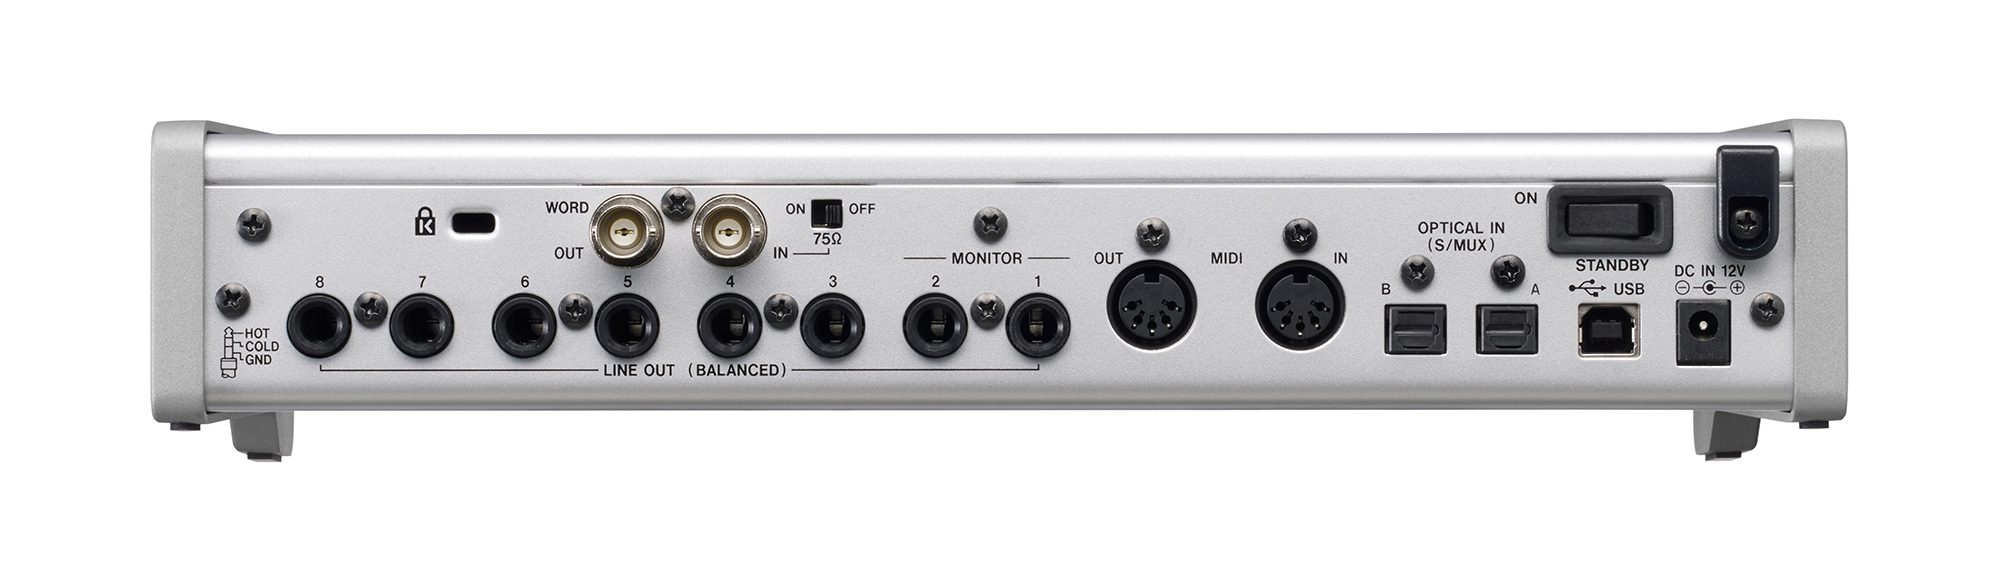 SERIES 208i | 20-IN/8-OUT USB Audio/MIDI Interface | TASCAM